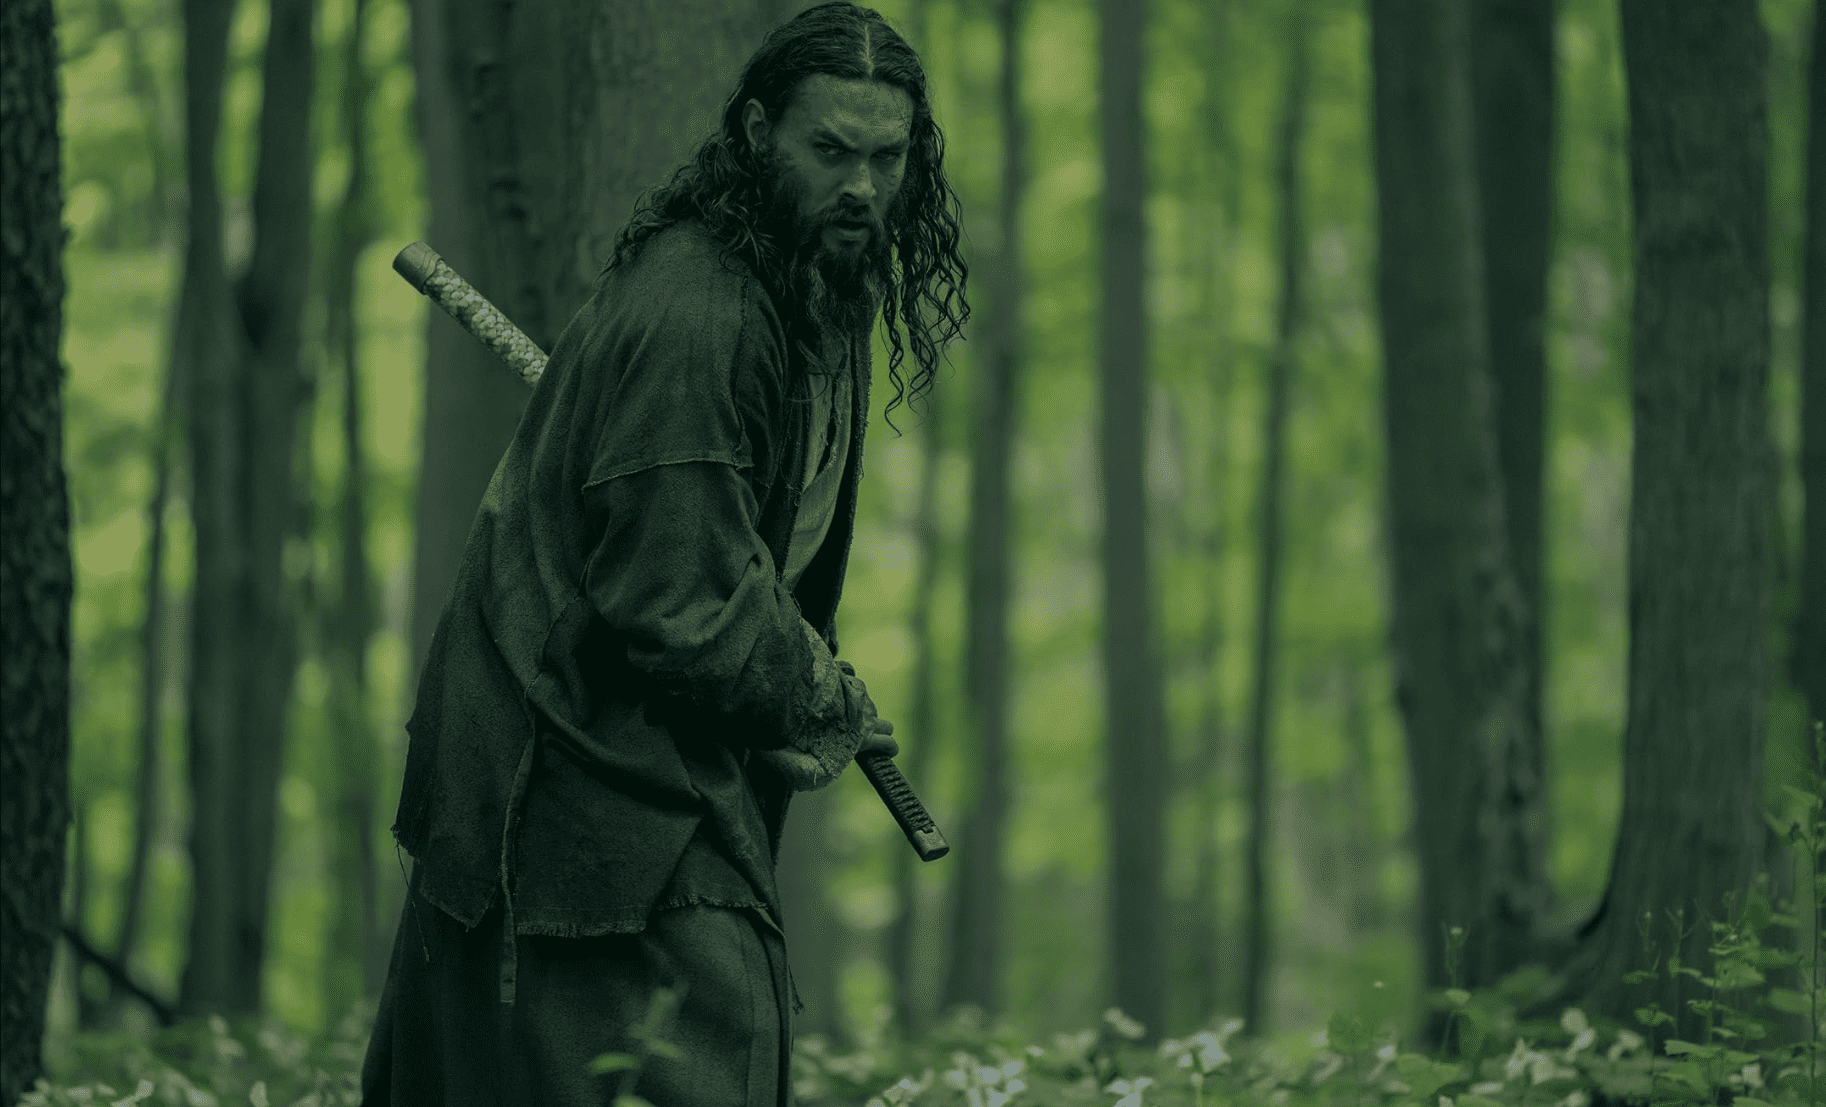 A man sheathes a katana in the woods in this image from Chernin Entertainment. 